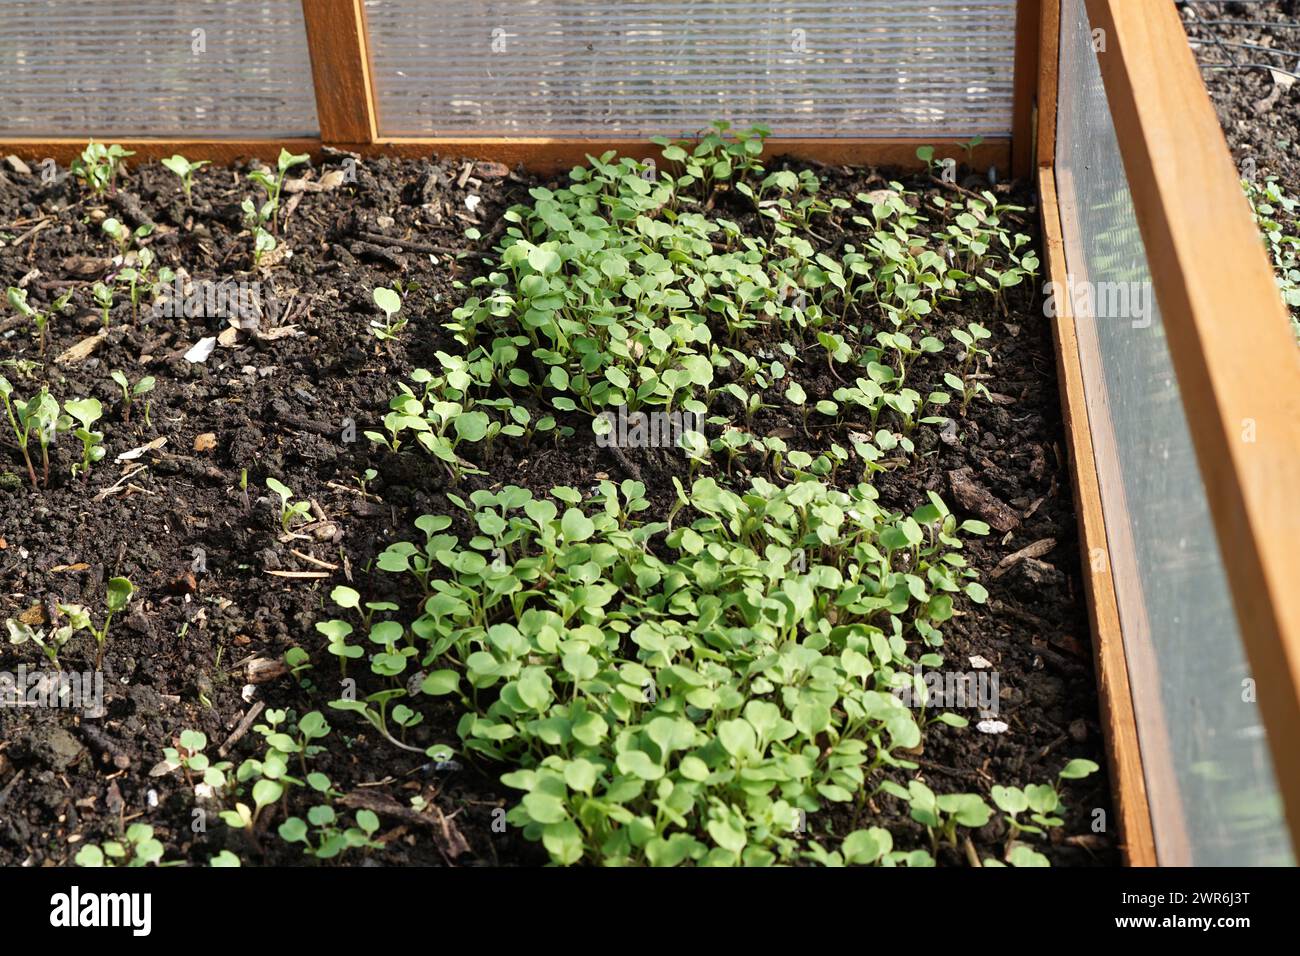 Opened wooden cold frame with young arugula plants Stock Photo